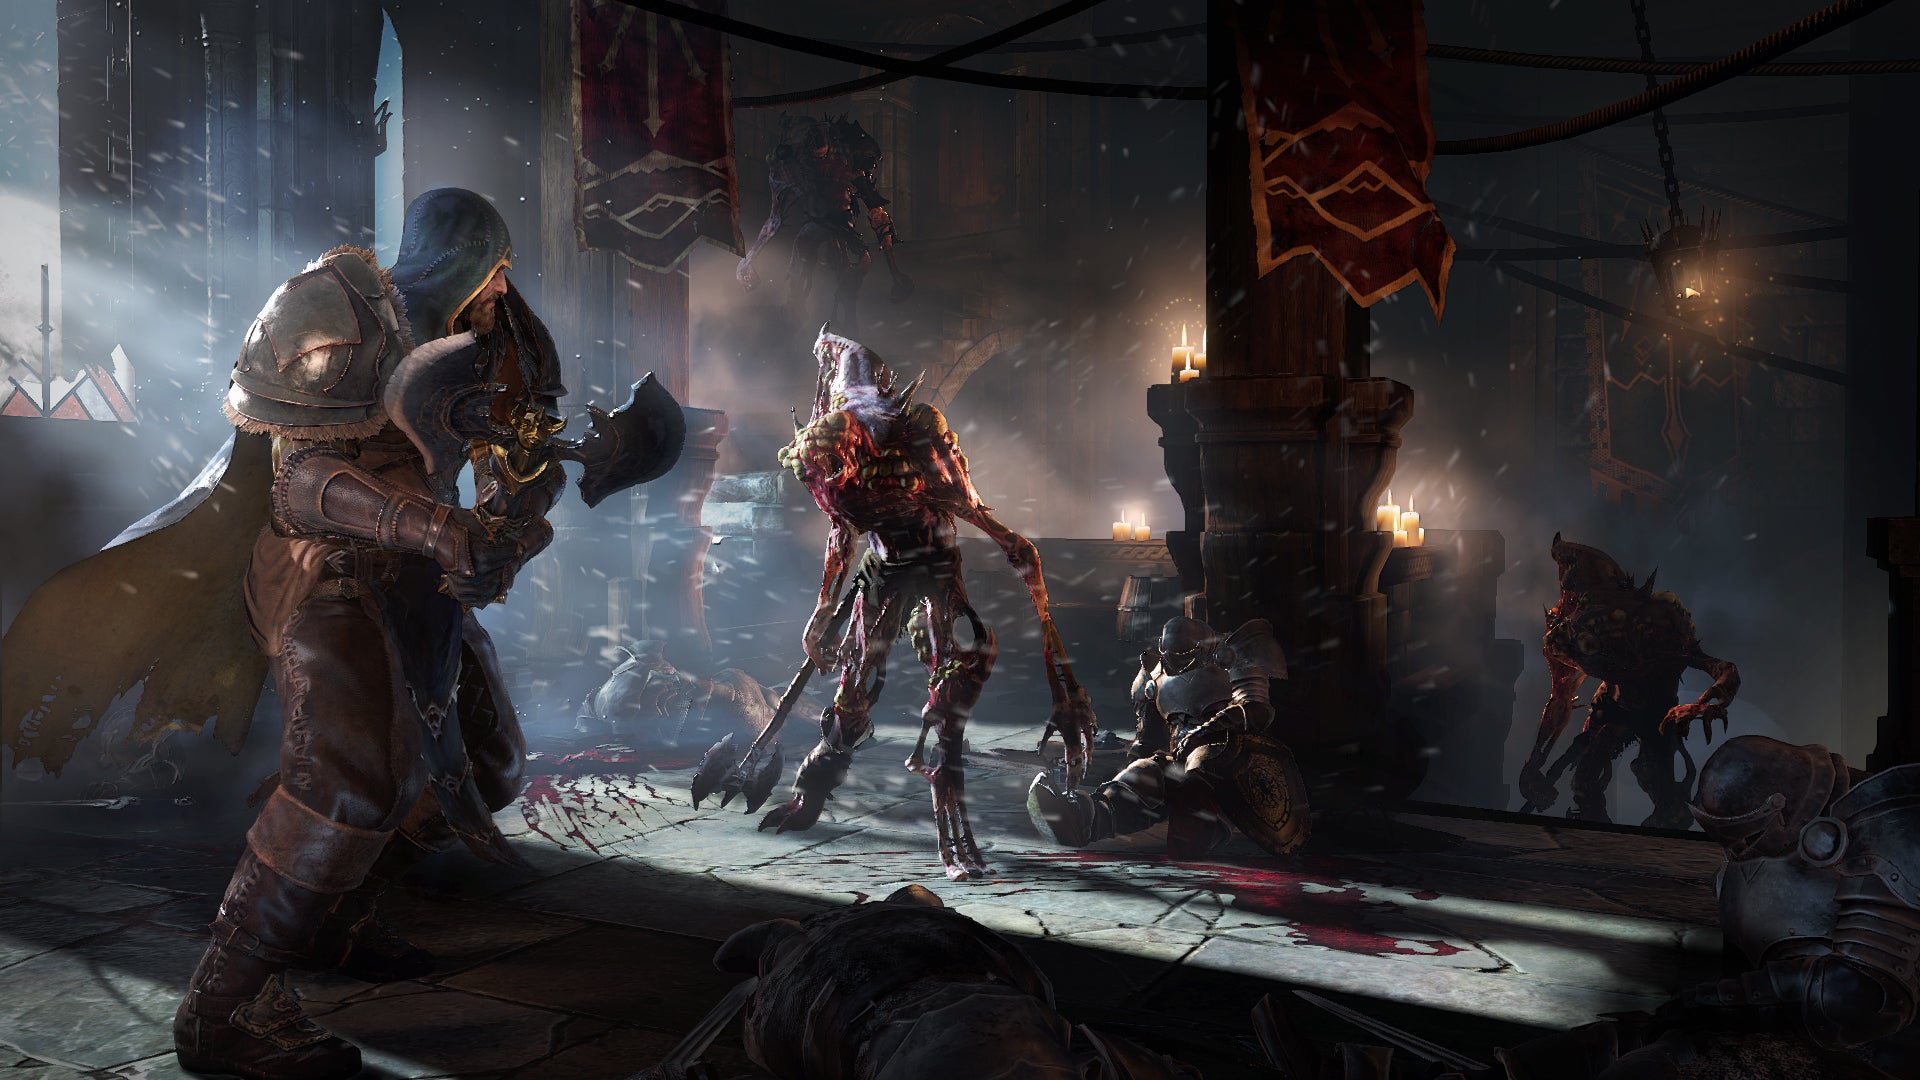 PS4 - Lords of the Fallen Gameplay Trailer 